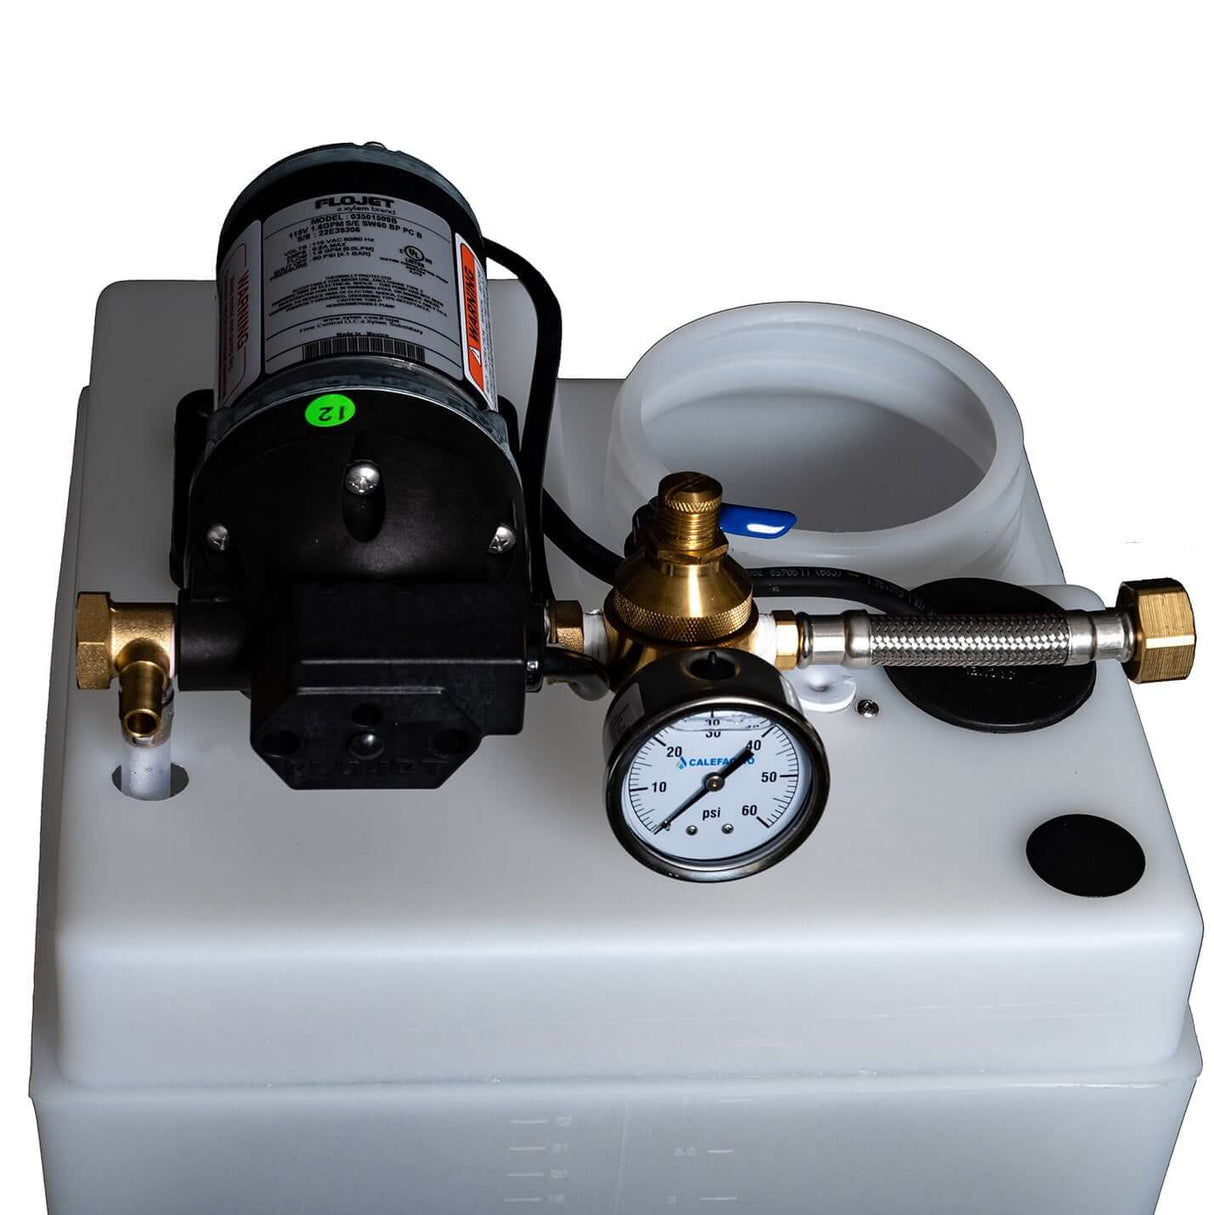 Calefactio GMP006 glycol make-up filling pump system for hydronic radiant floor heating system - top inside